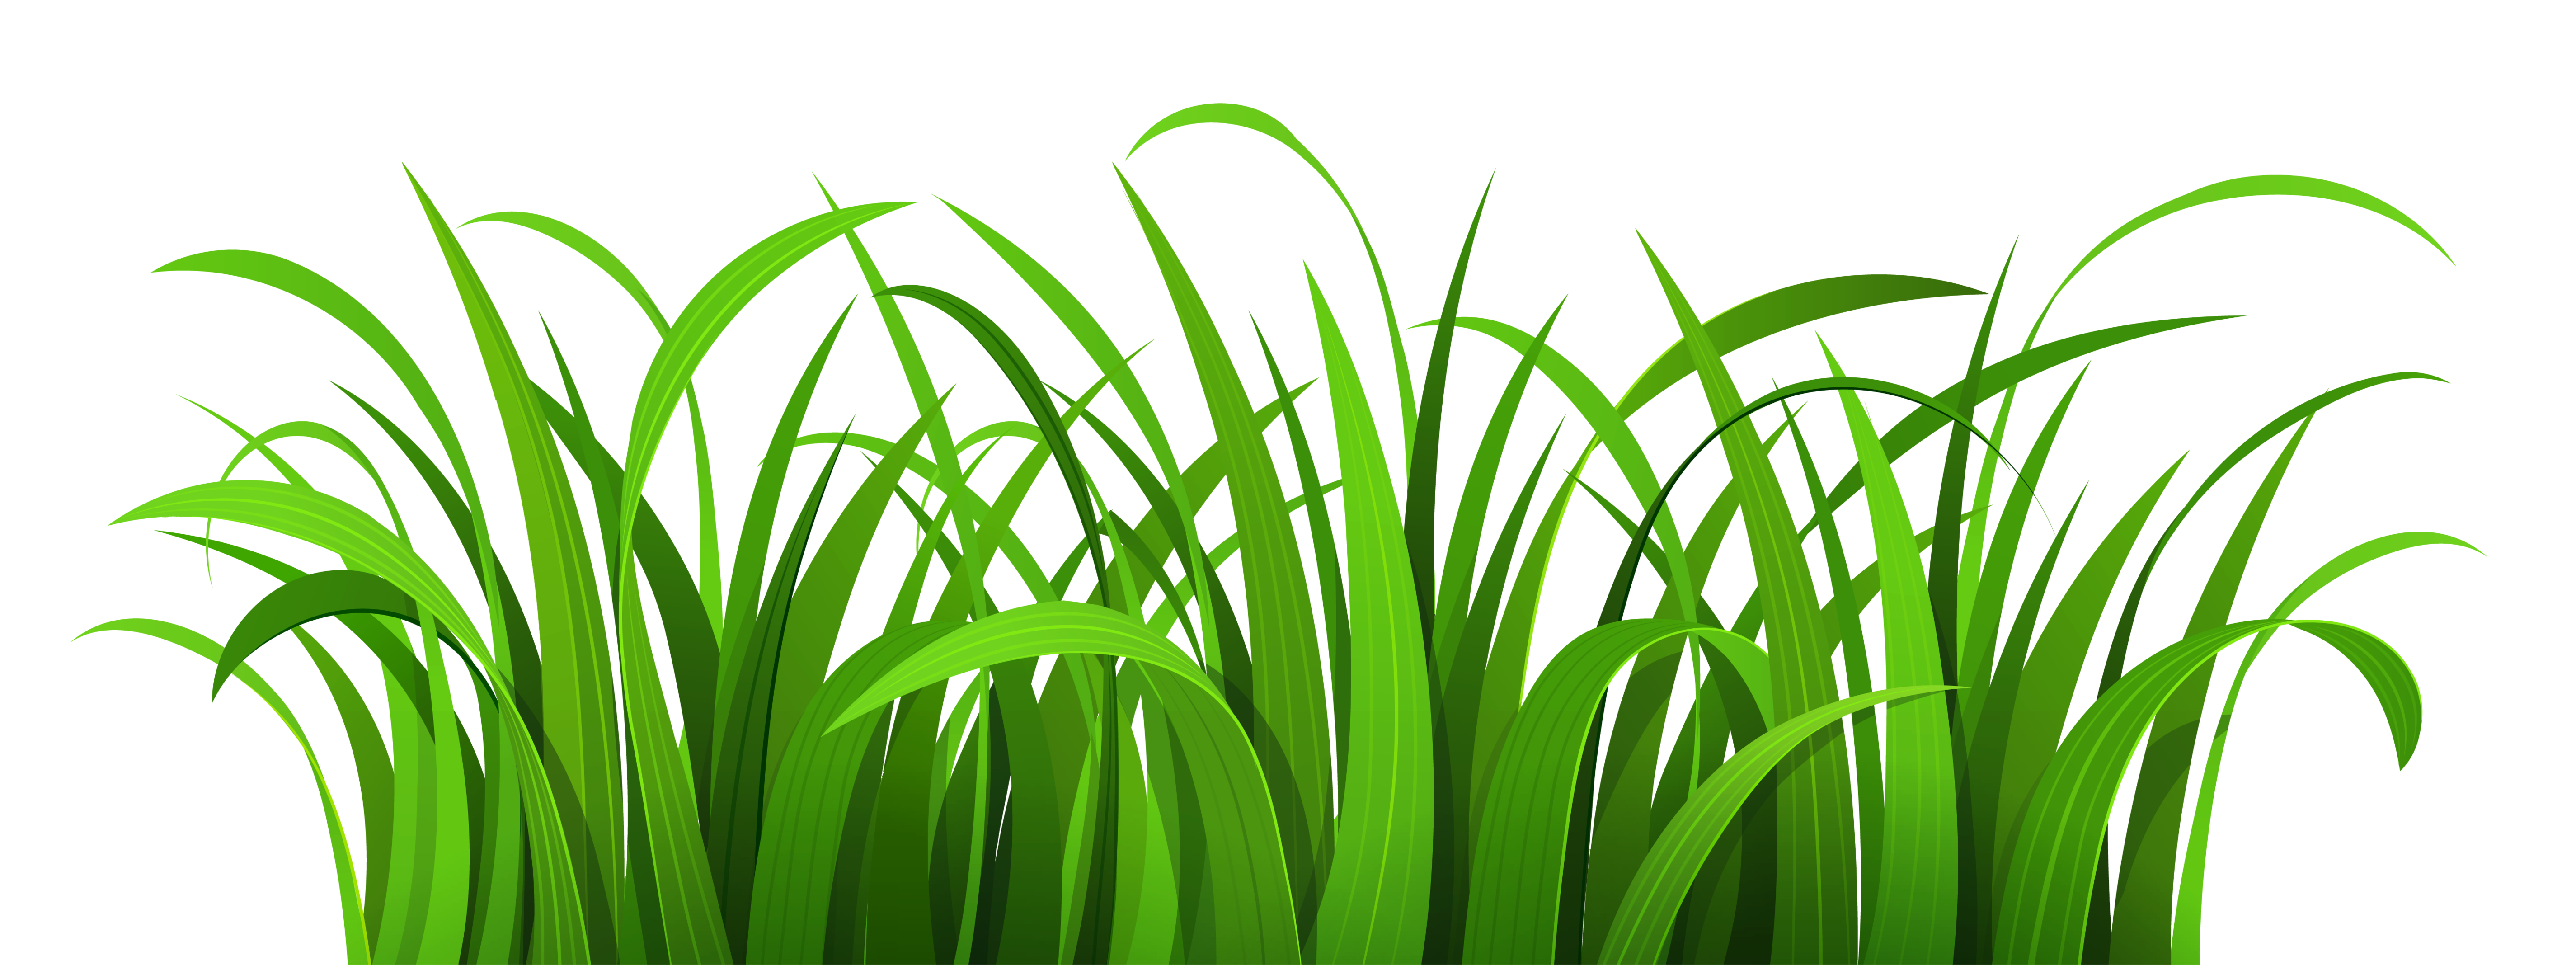 Grass Clip Art Border Clipart Panda Free Images Clipart - Free to ...